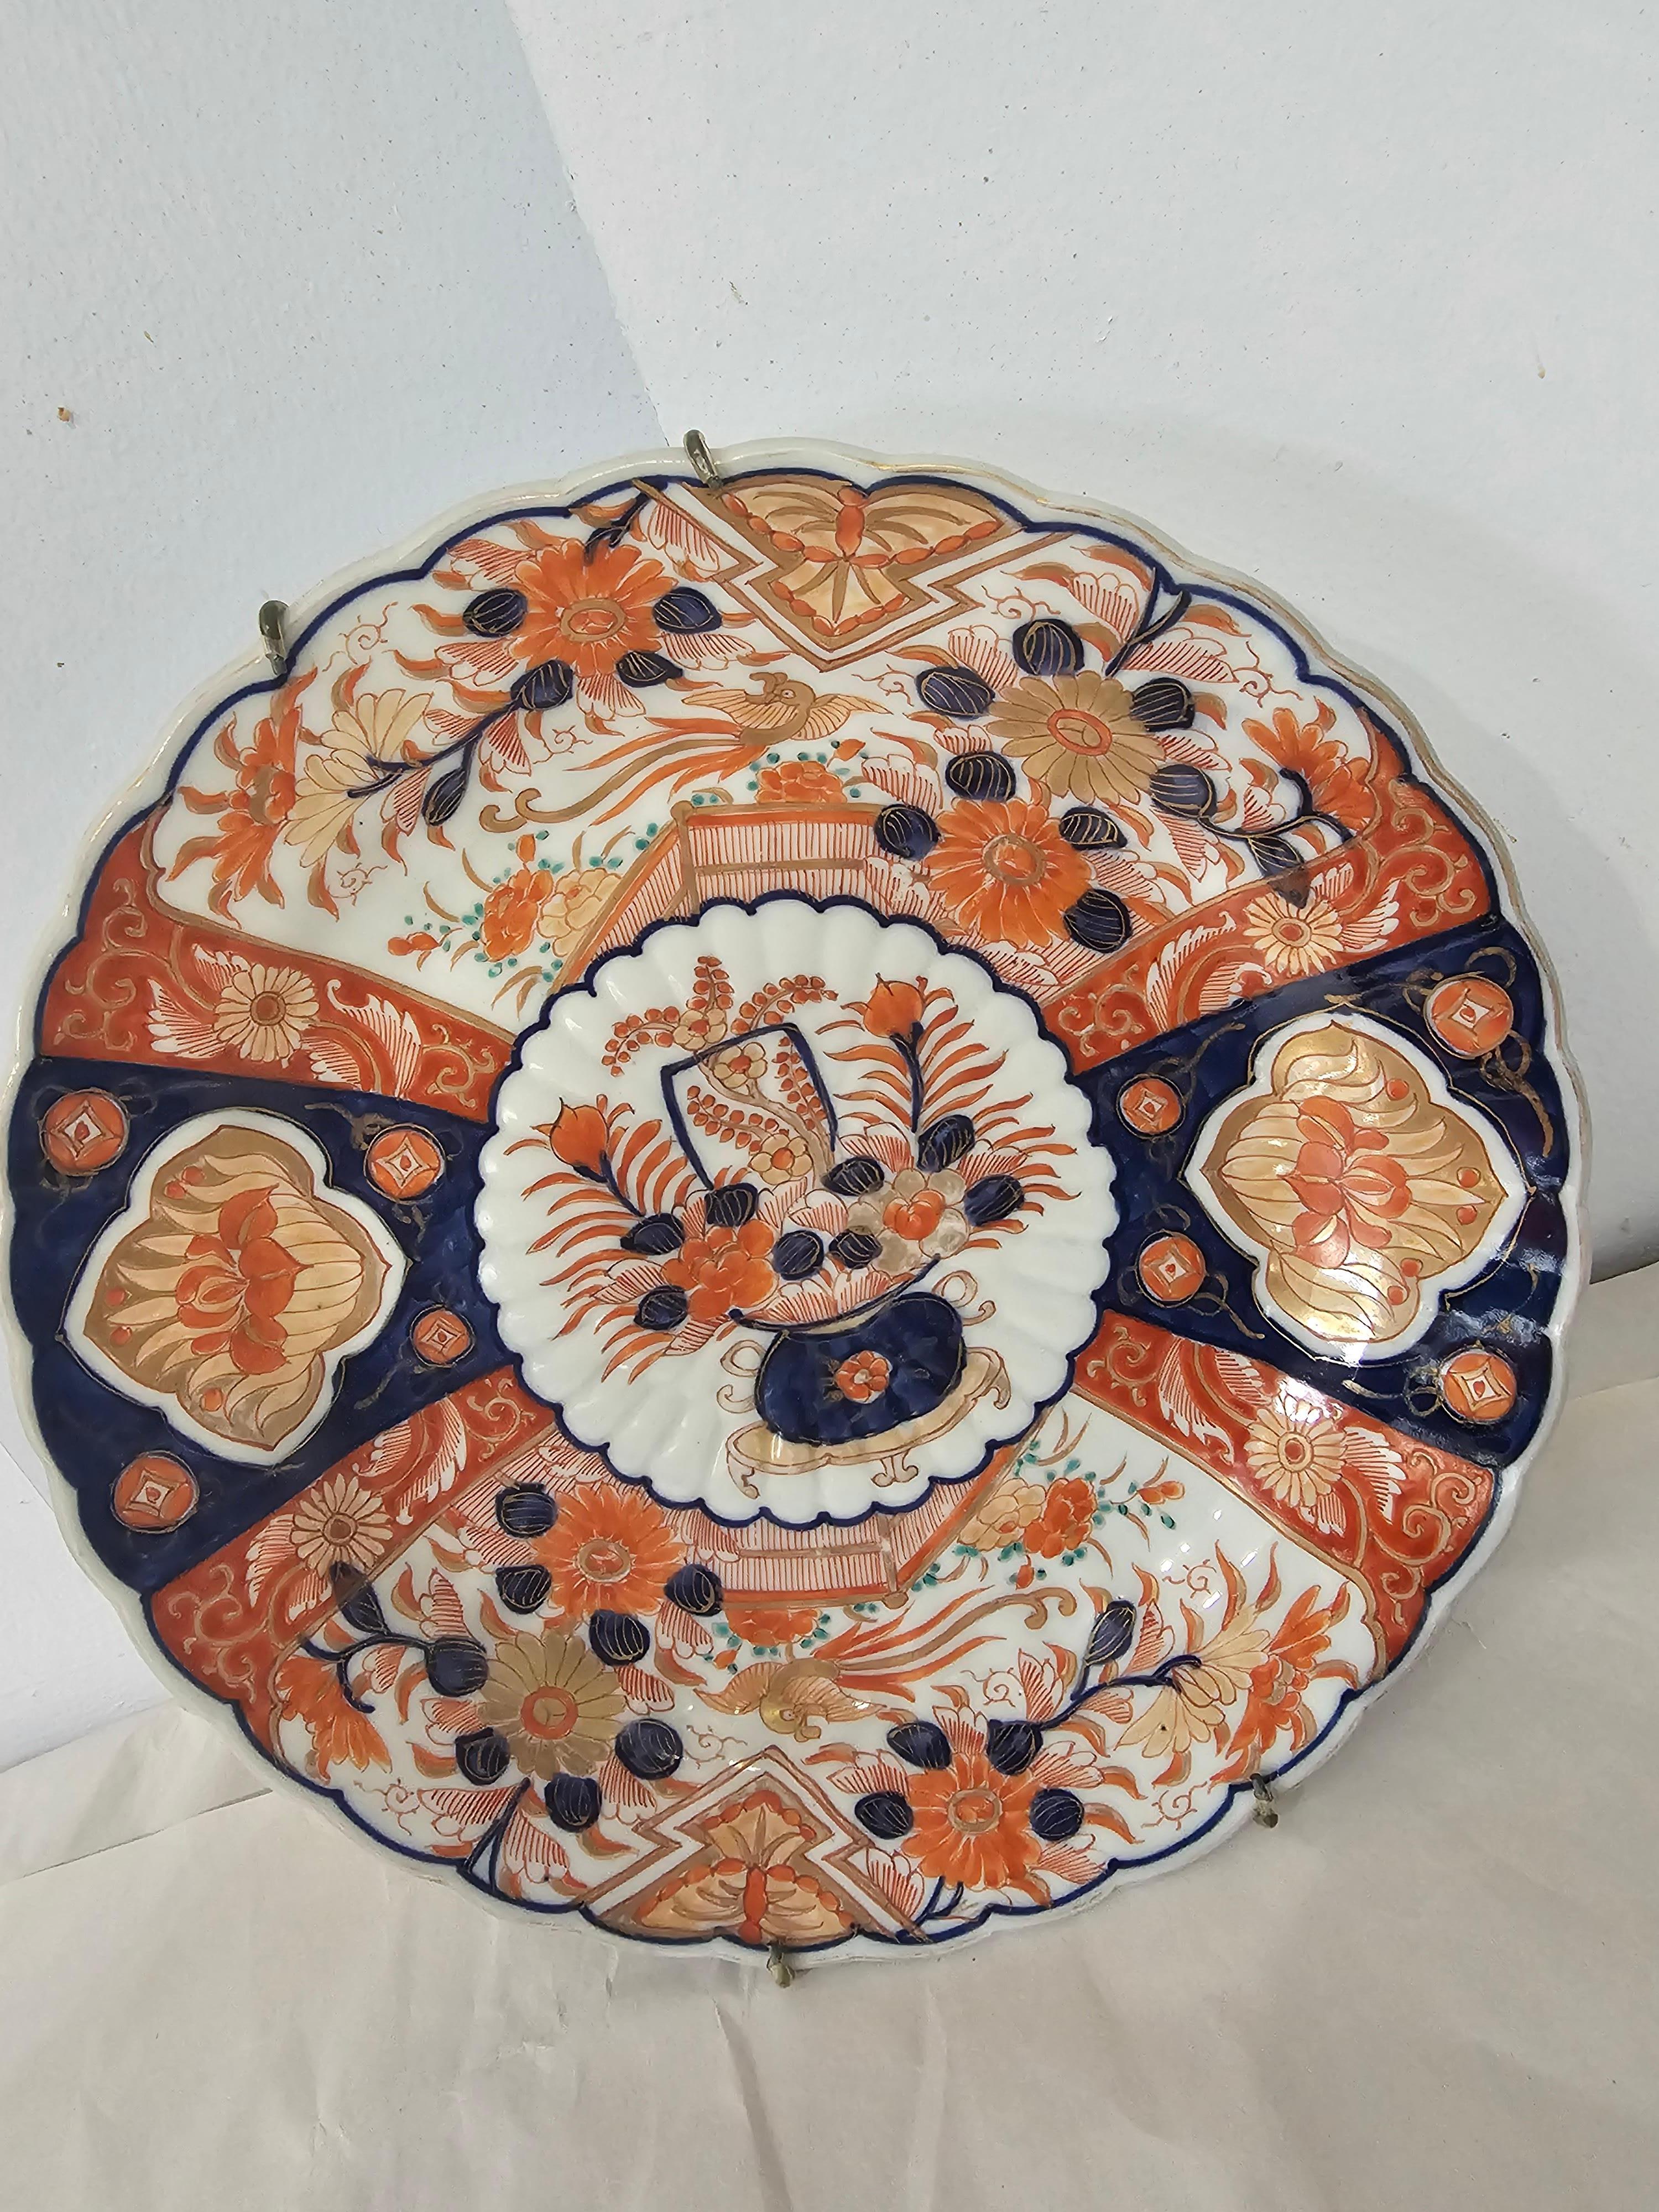 A 19th Century Large Japanese Imari Decorative Platter in great antique construction . Measures 10